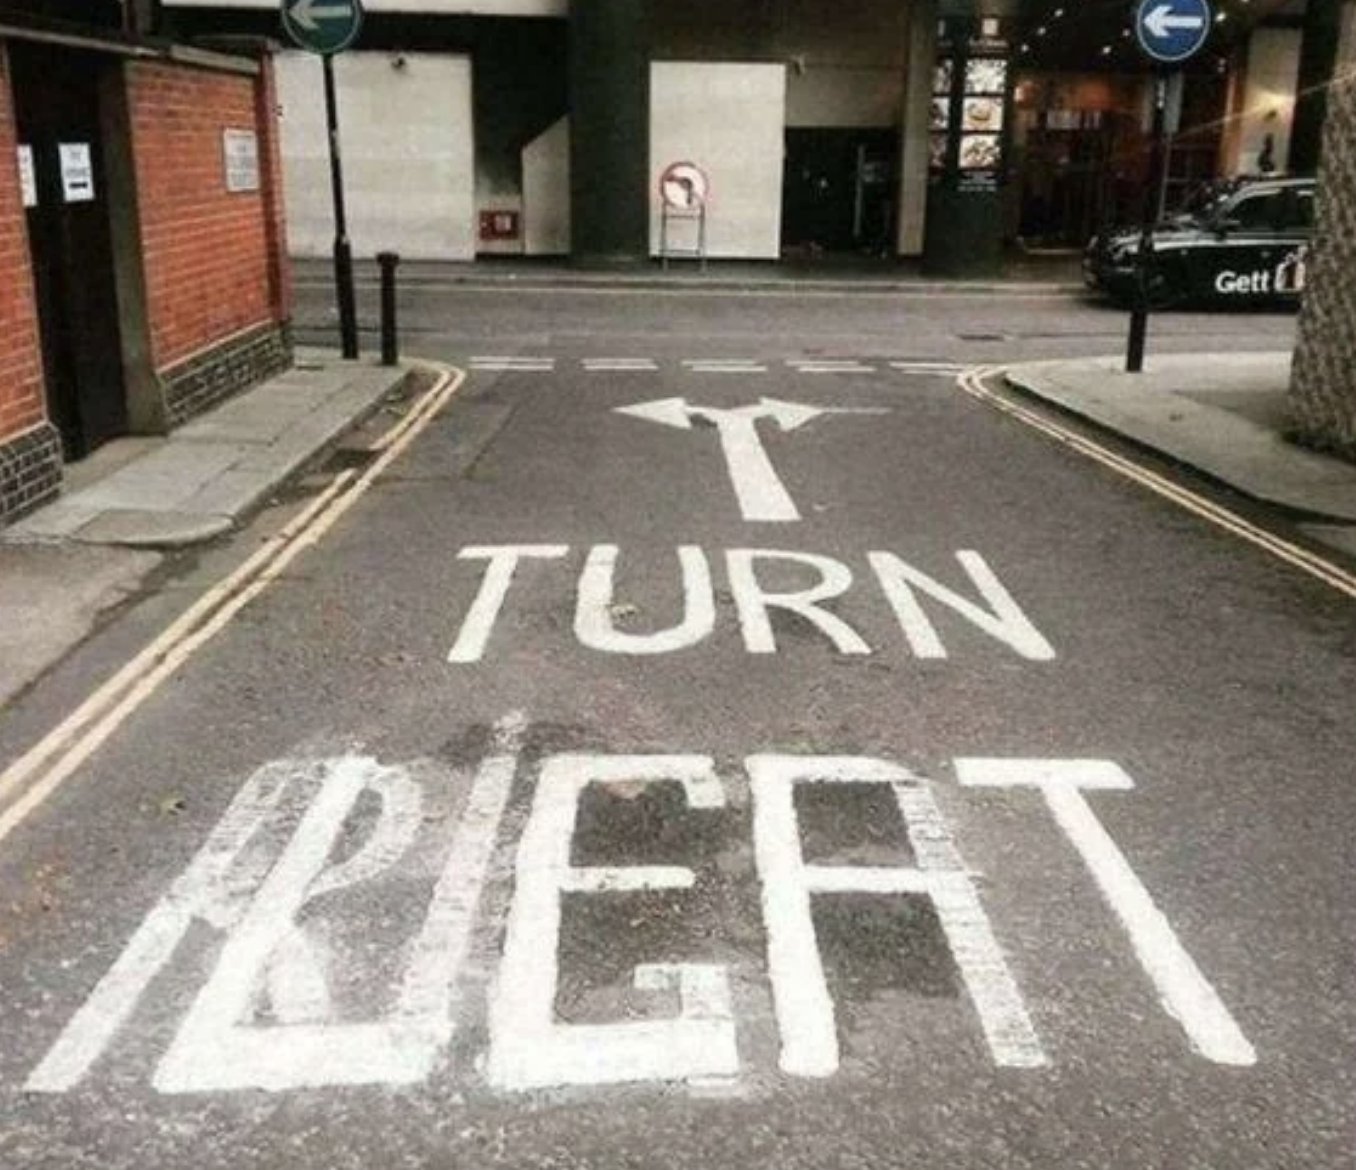 Road marking with a misspelling, should read &quot;TURN RIGHT&quot; but says &quot;TURN BEAT&quot; instead